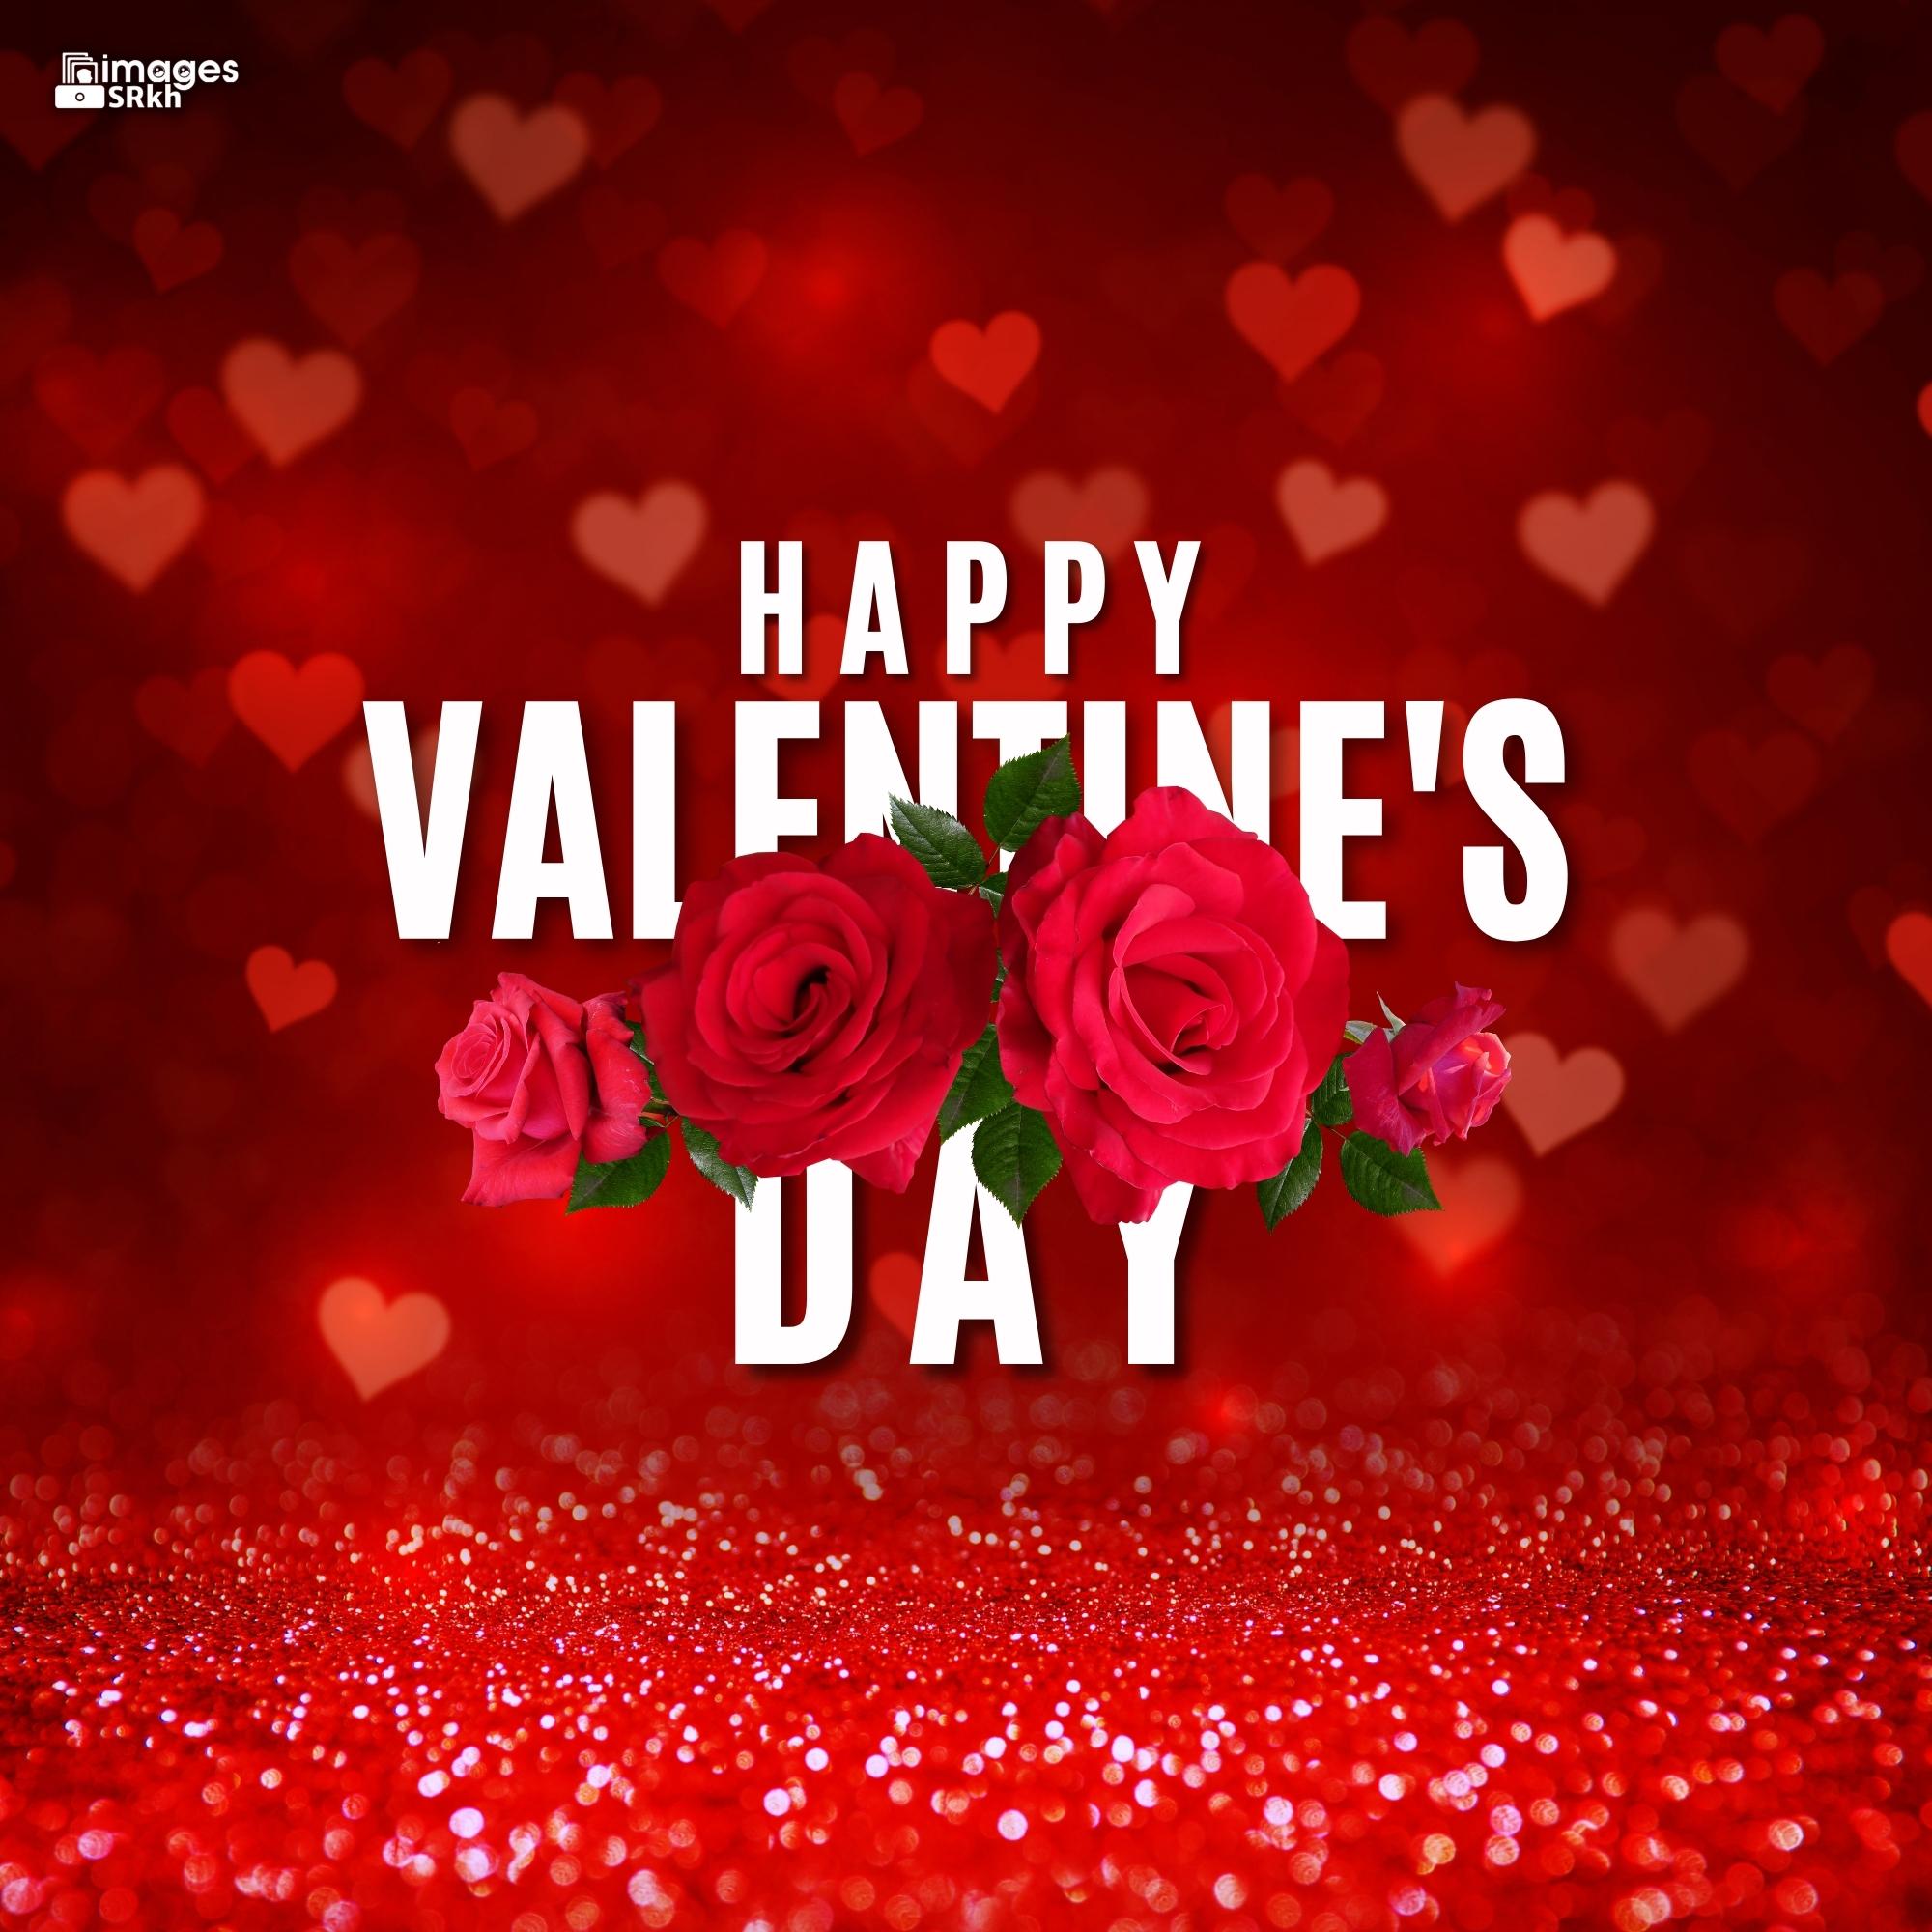 Happy Valentines Day | 469 | PREMIUM IMAGES | Wishes for Love